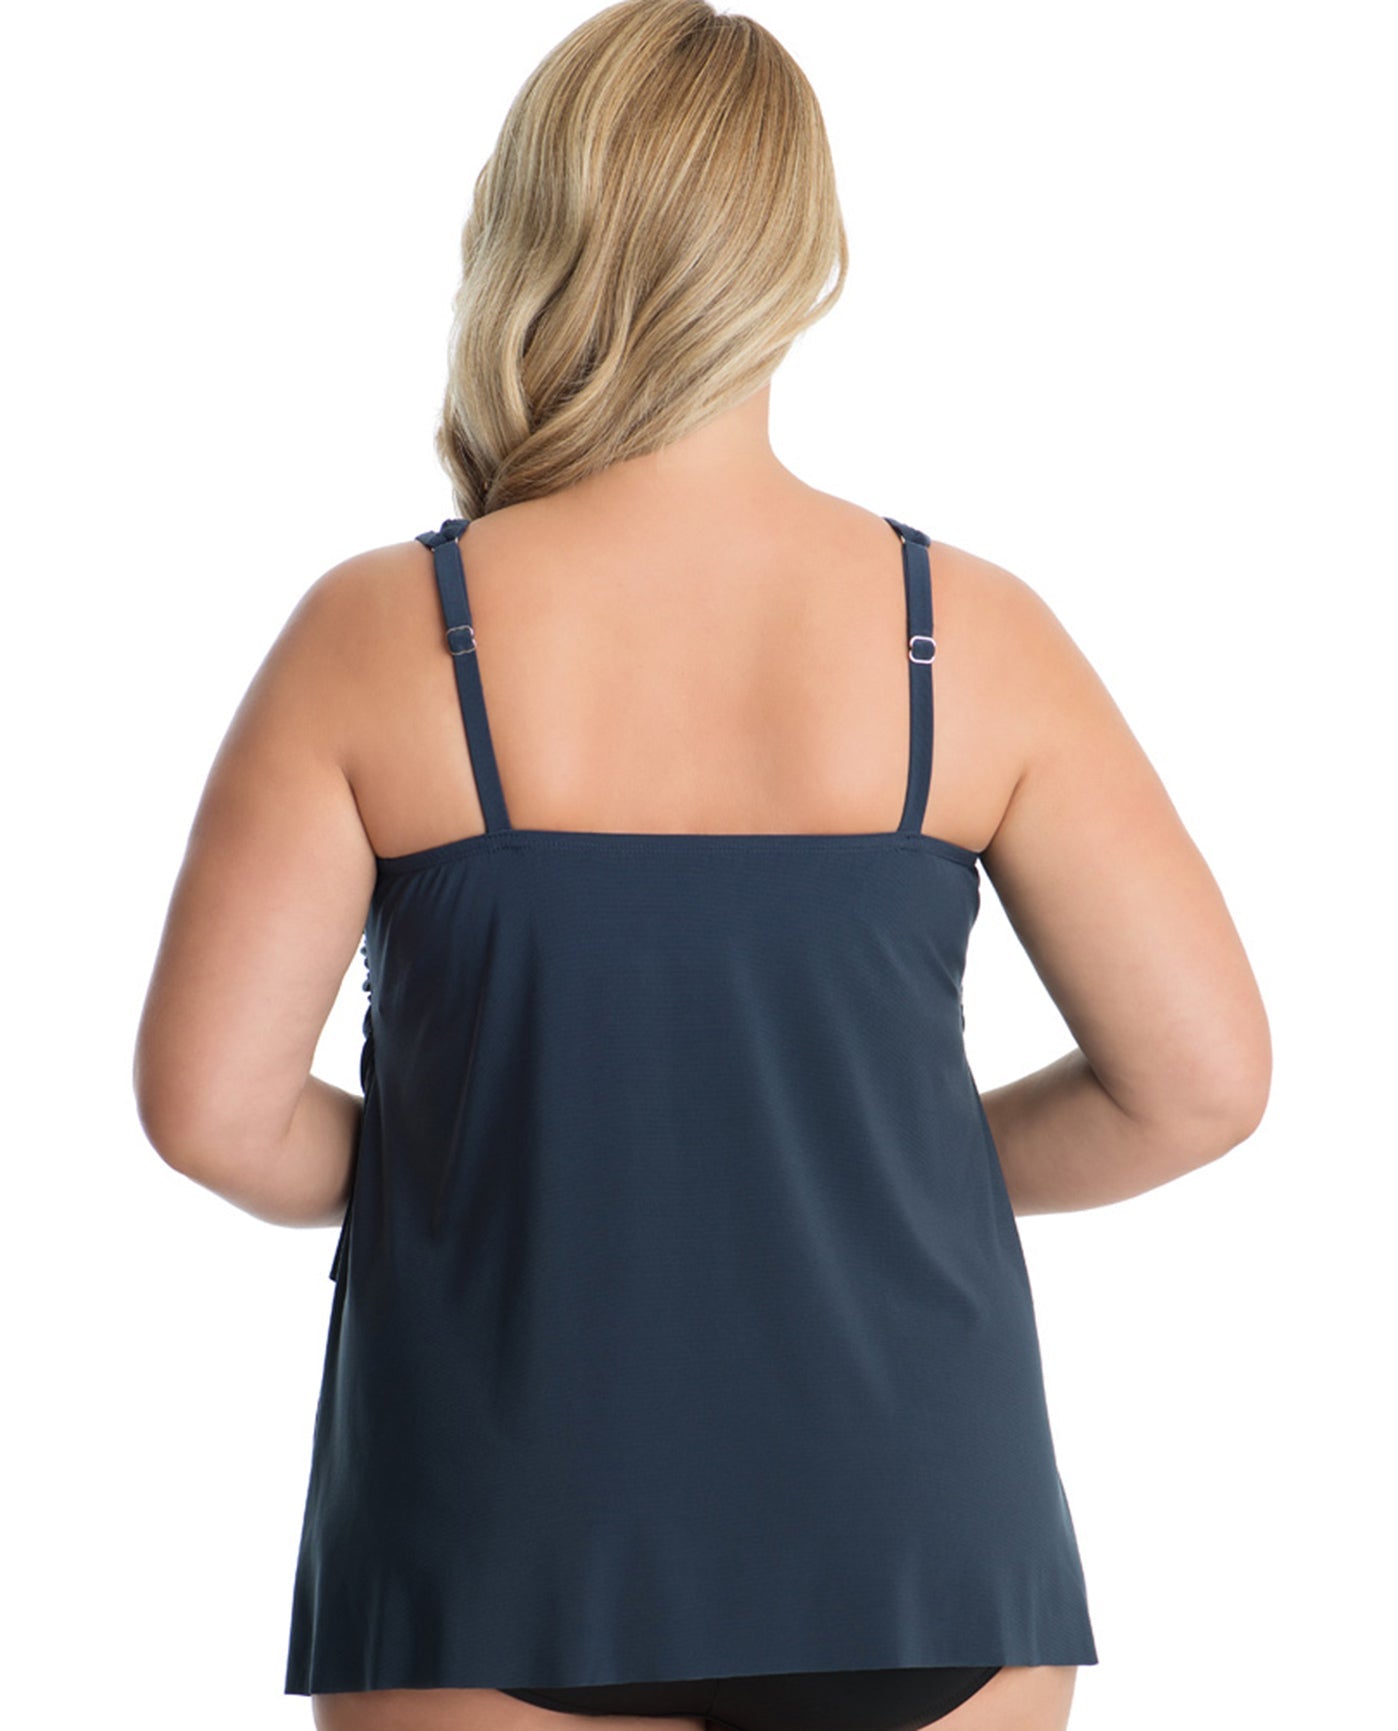 Back View Of Miraclesuit Illusionist Black Plus Size Mirage Underwire Tankini Top | MIR Midnight Blue